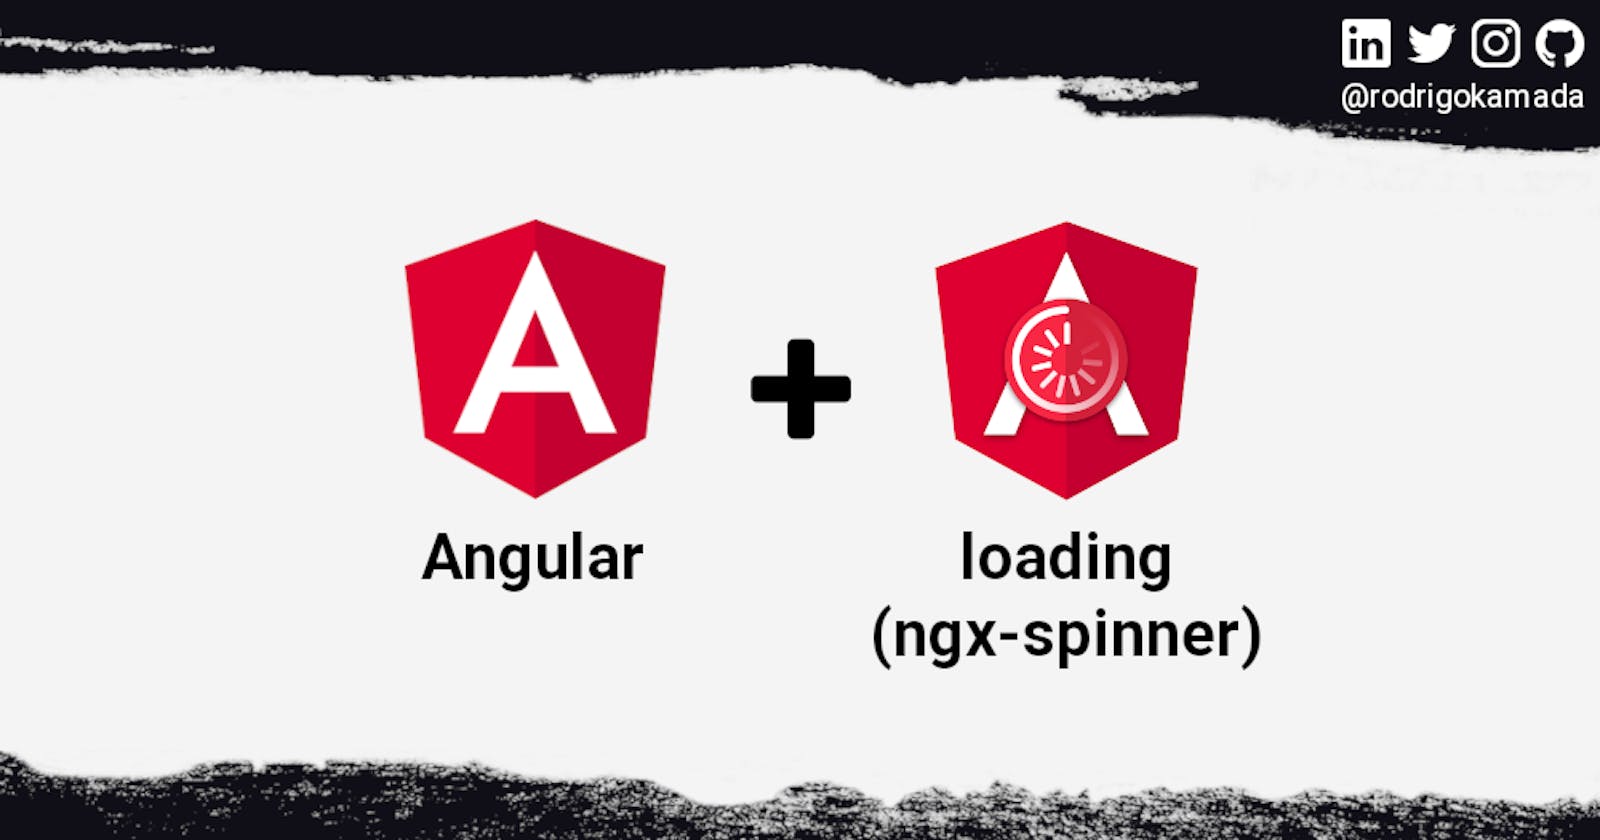 Adding the loading component (spinner) to an Angular application